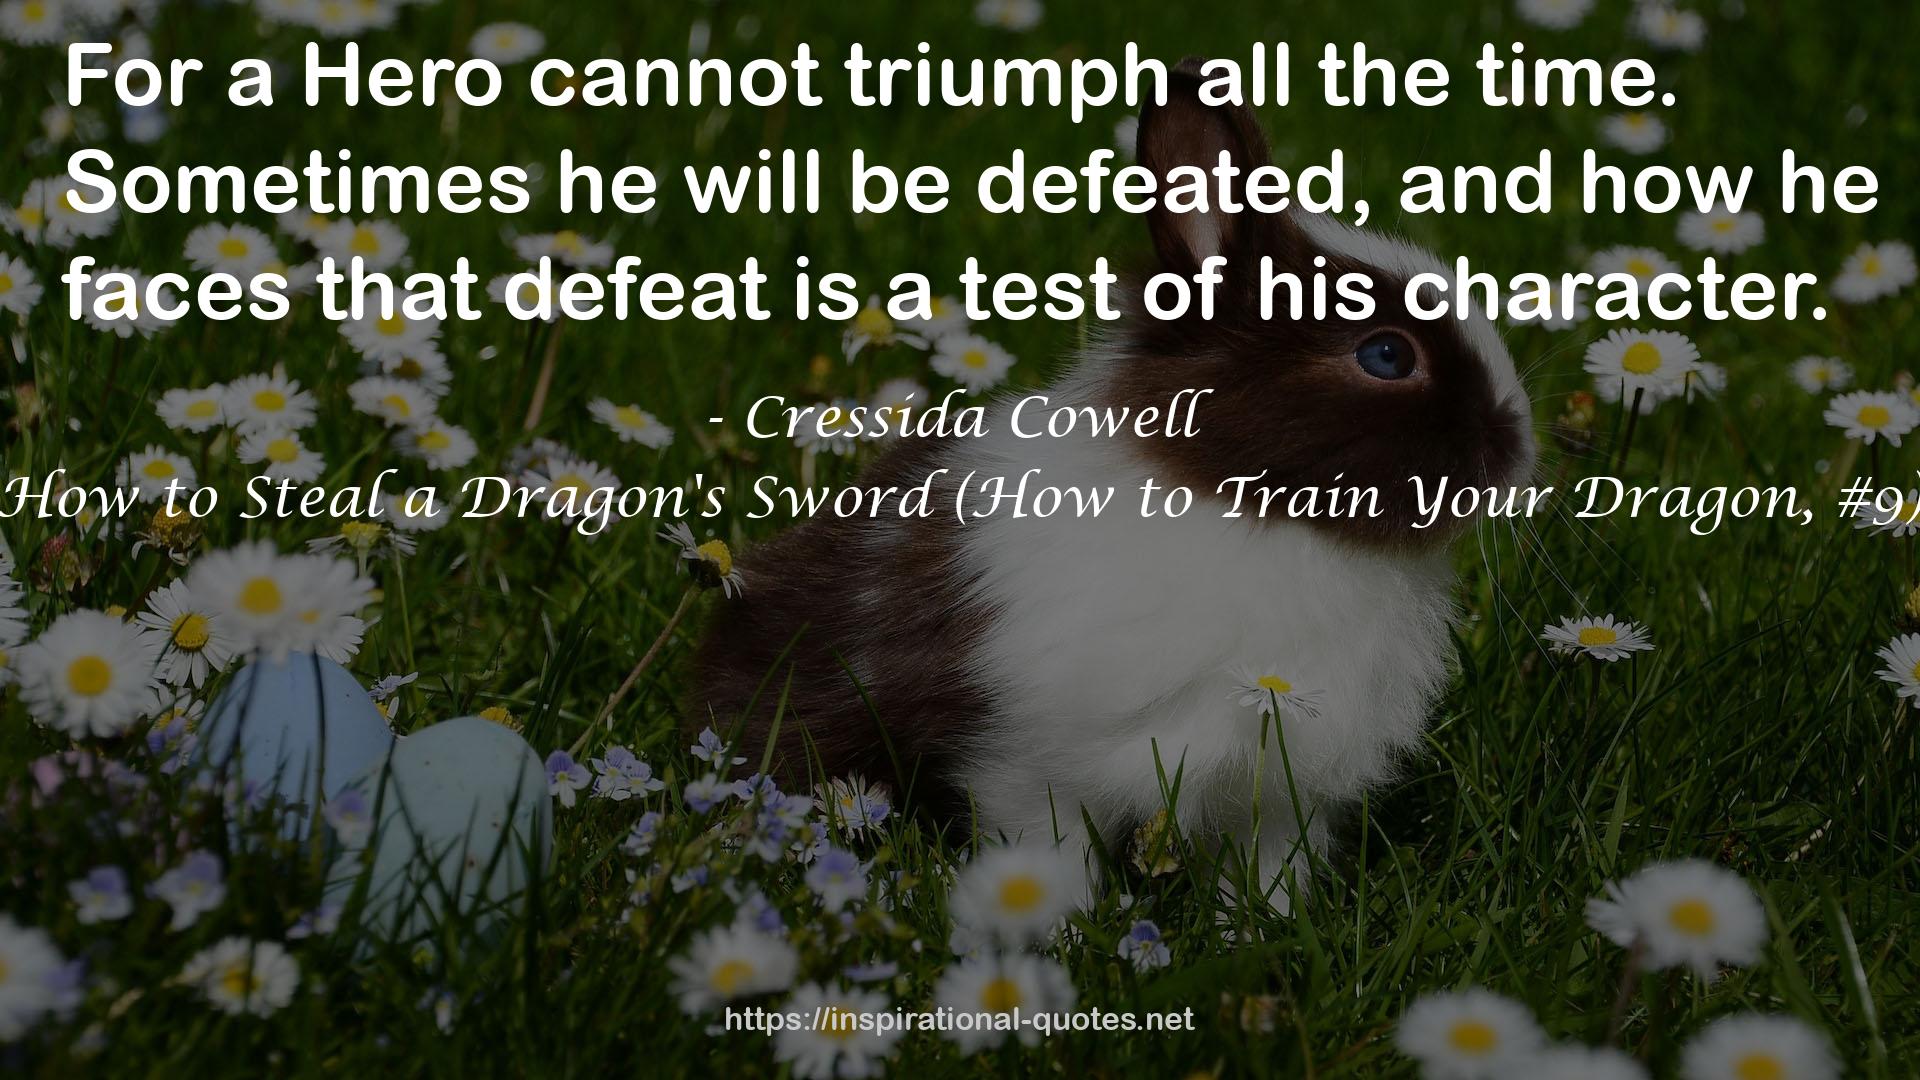 How to Steal a Dragon's Sword (How to Train Your Dragon, #9) QUOTES